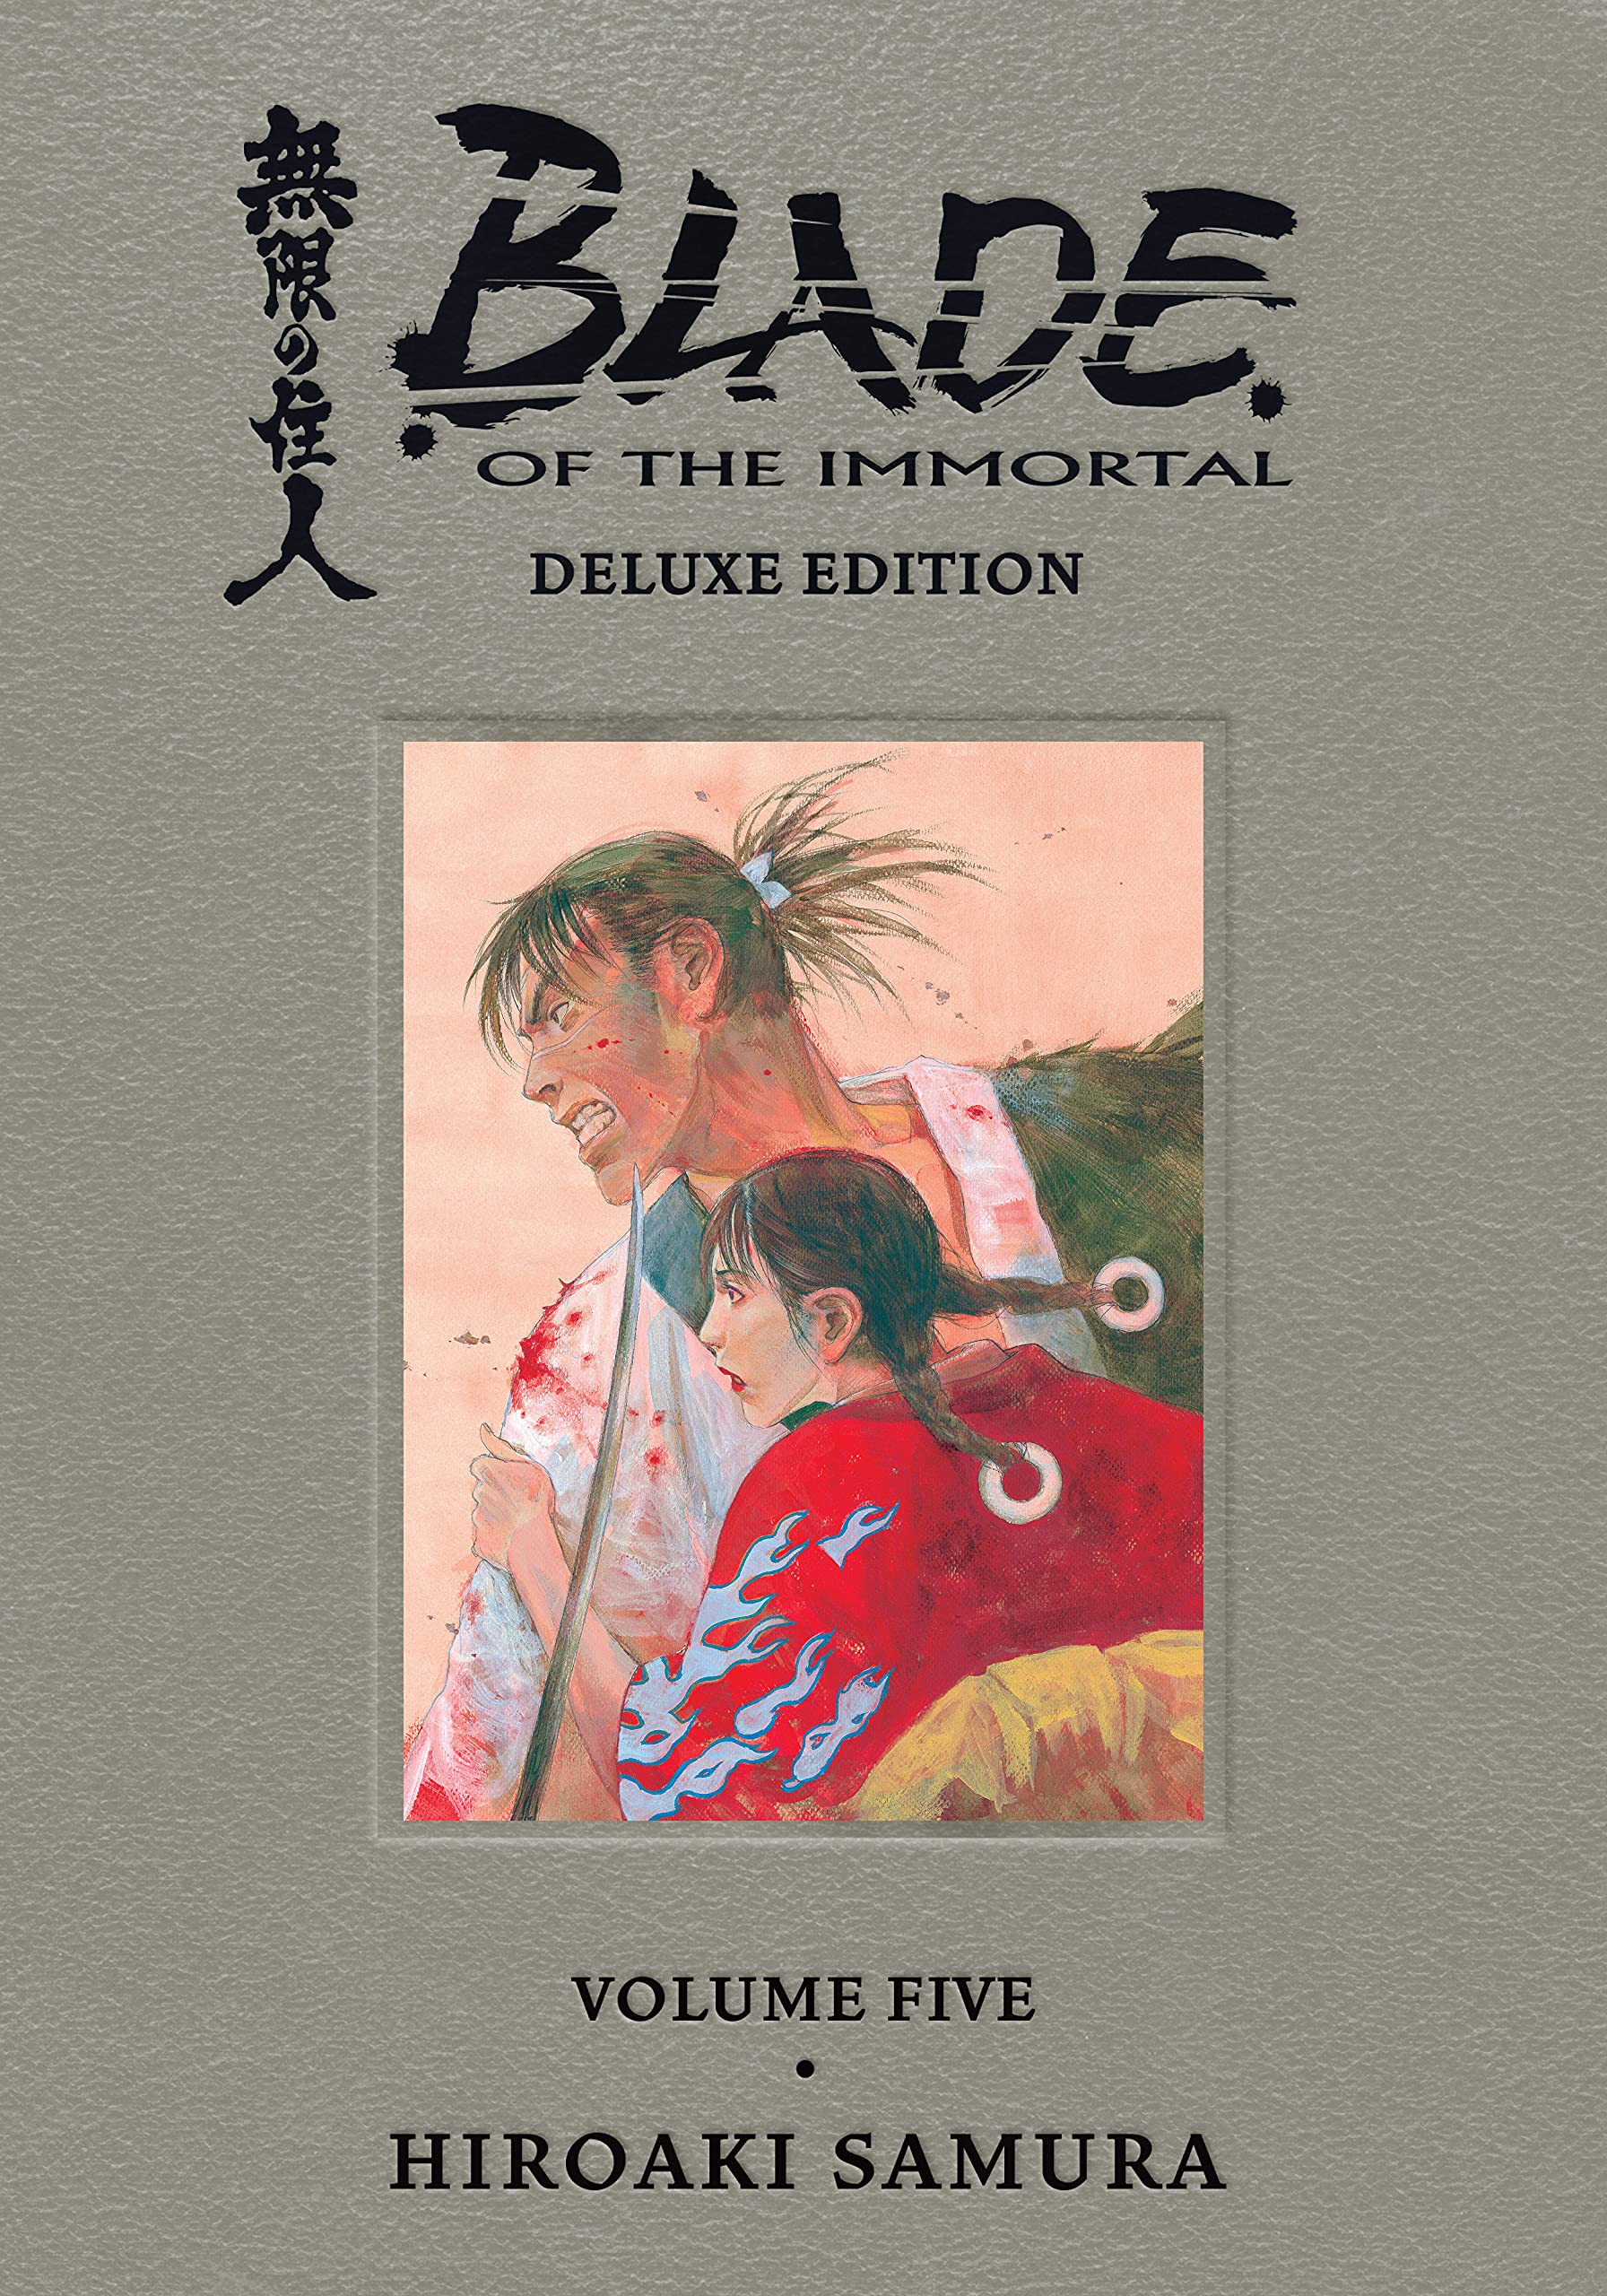 Blade of the Immortal Deluxe Edition Vol. 05